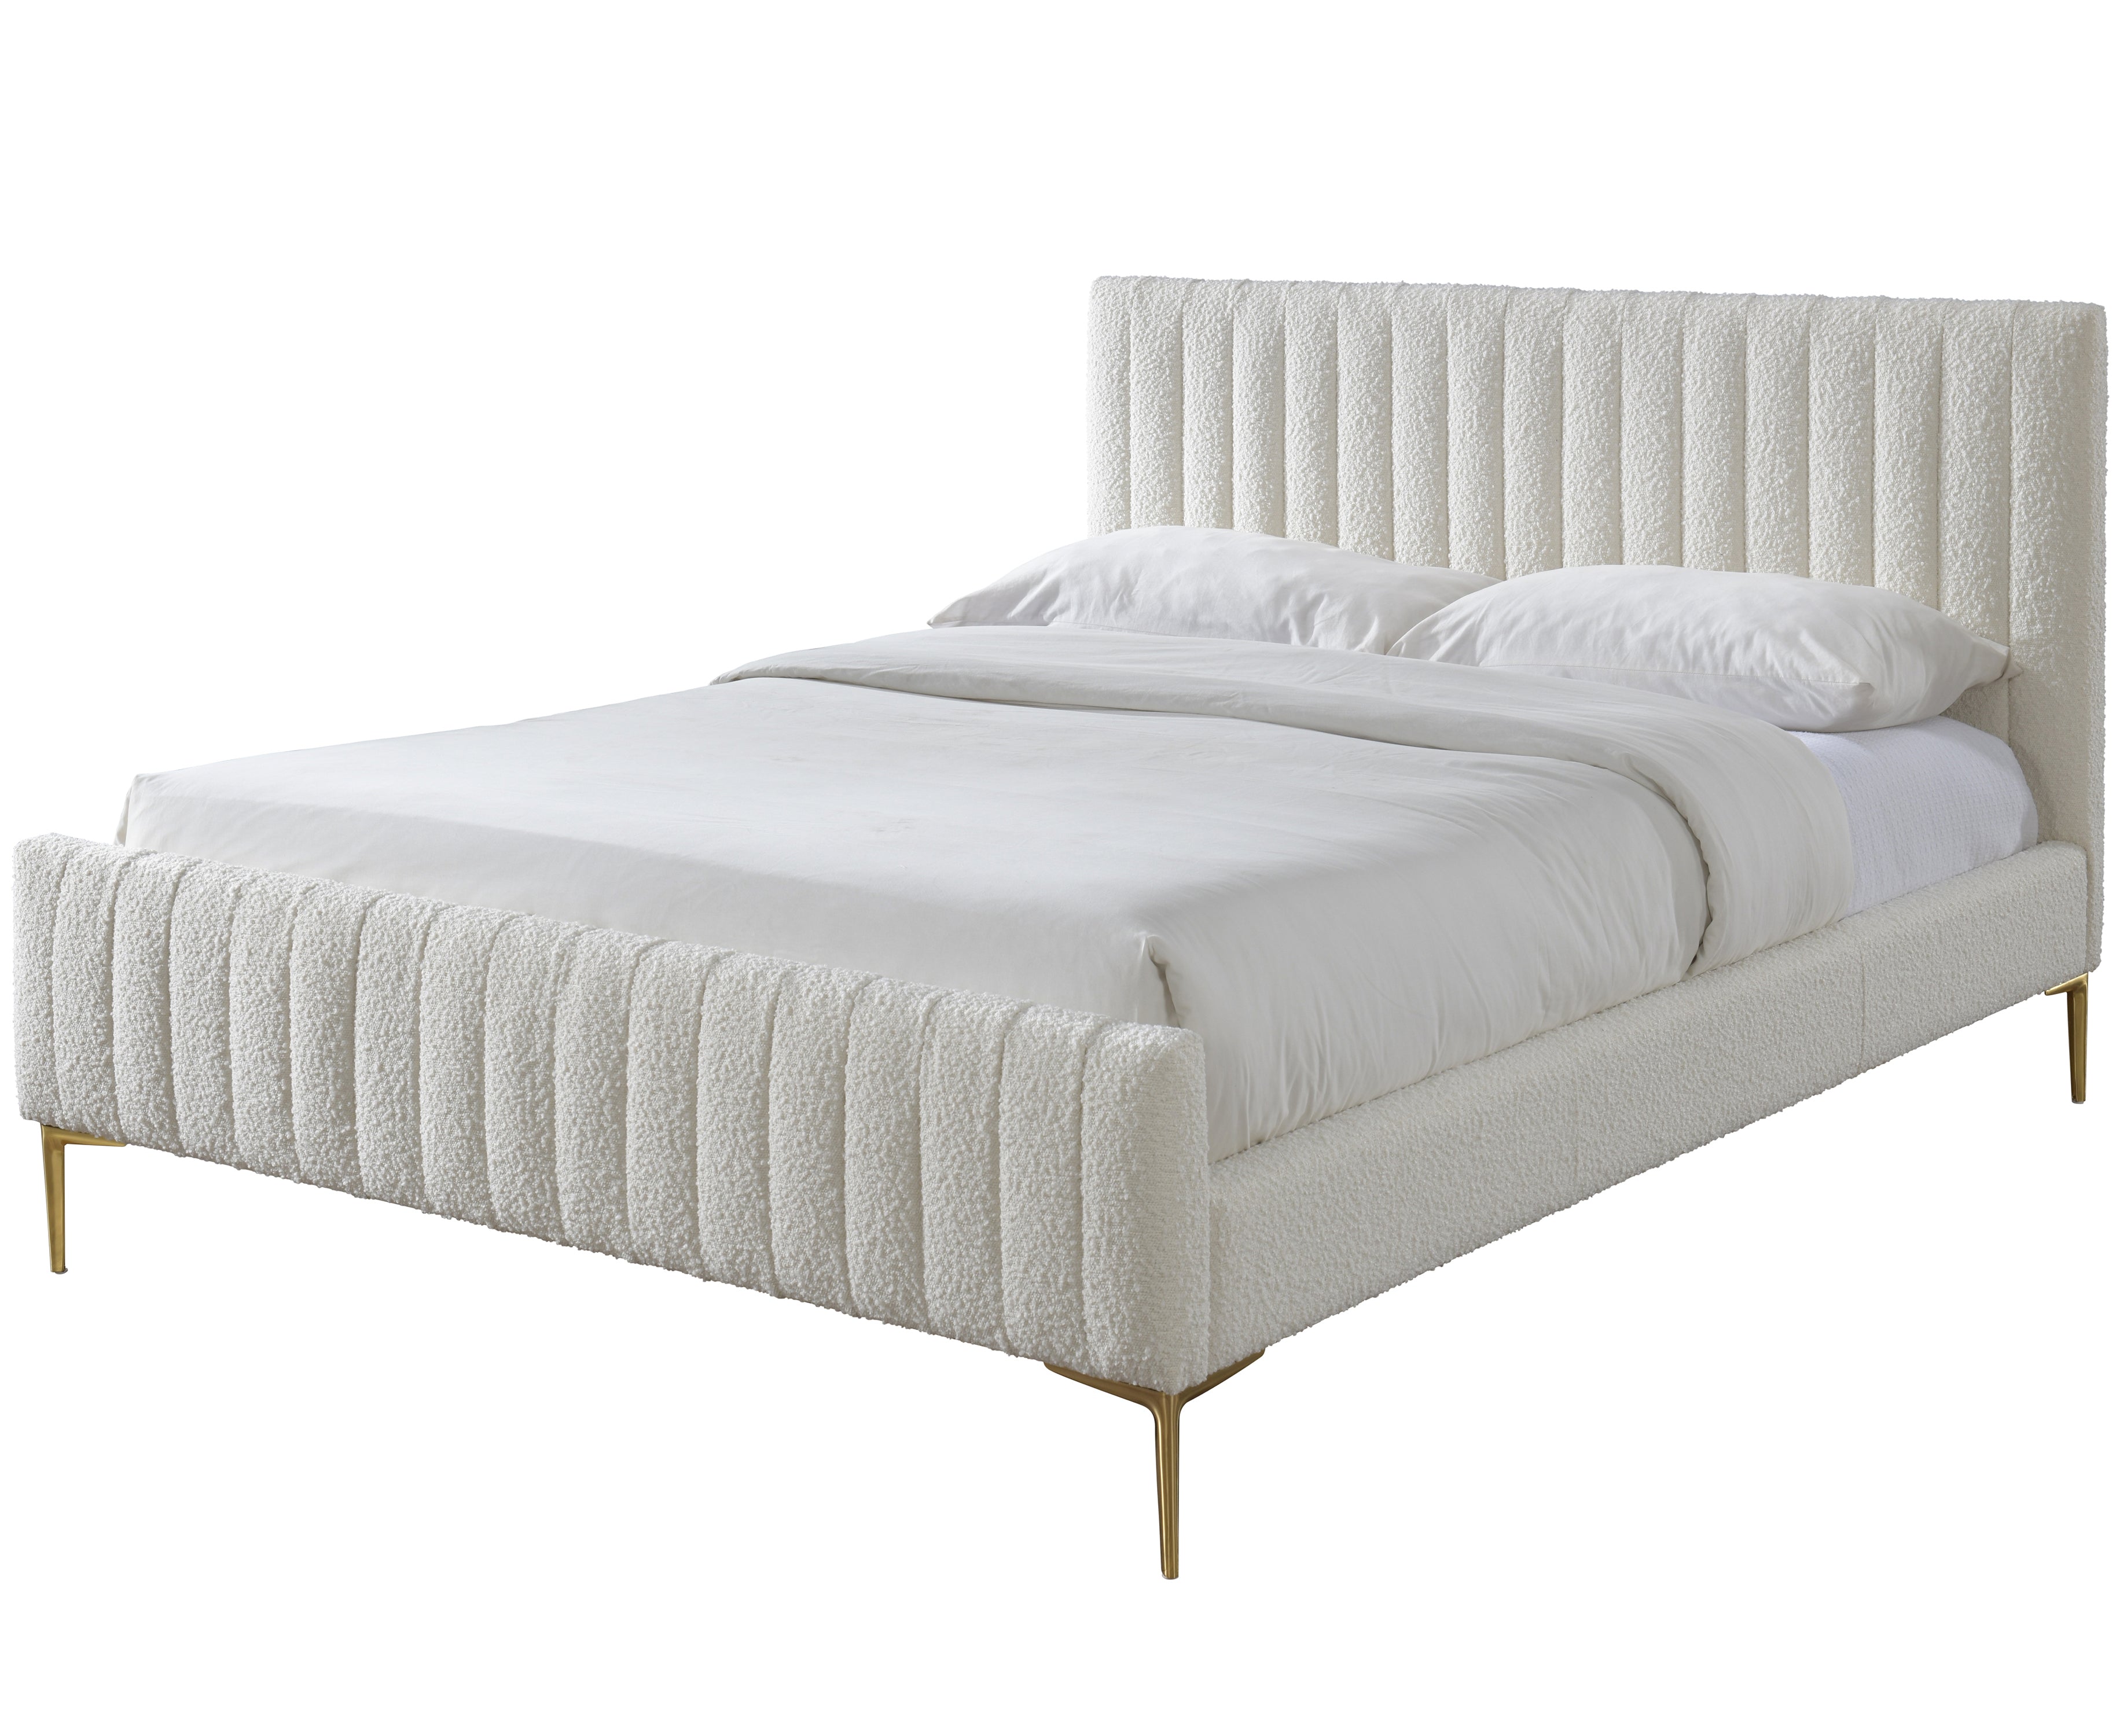 Julia Upholstered Platform Bed - Queen size, White Boucle